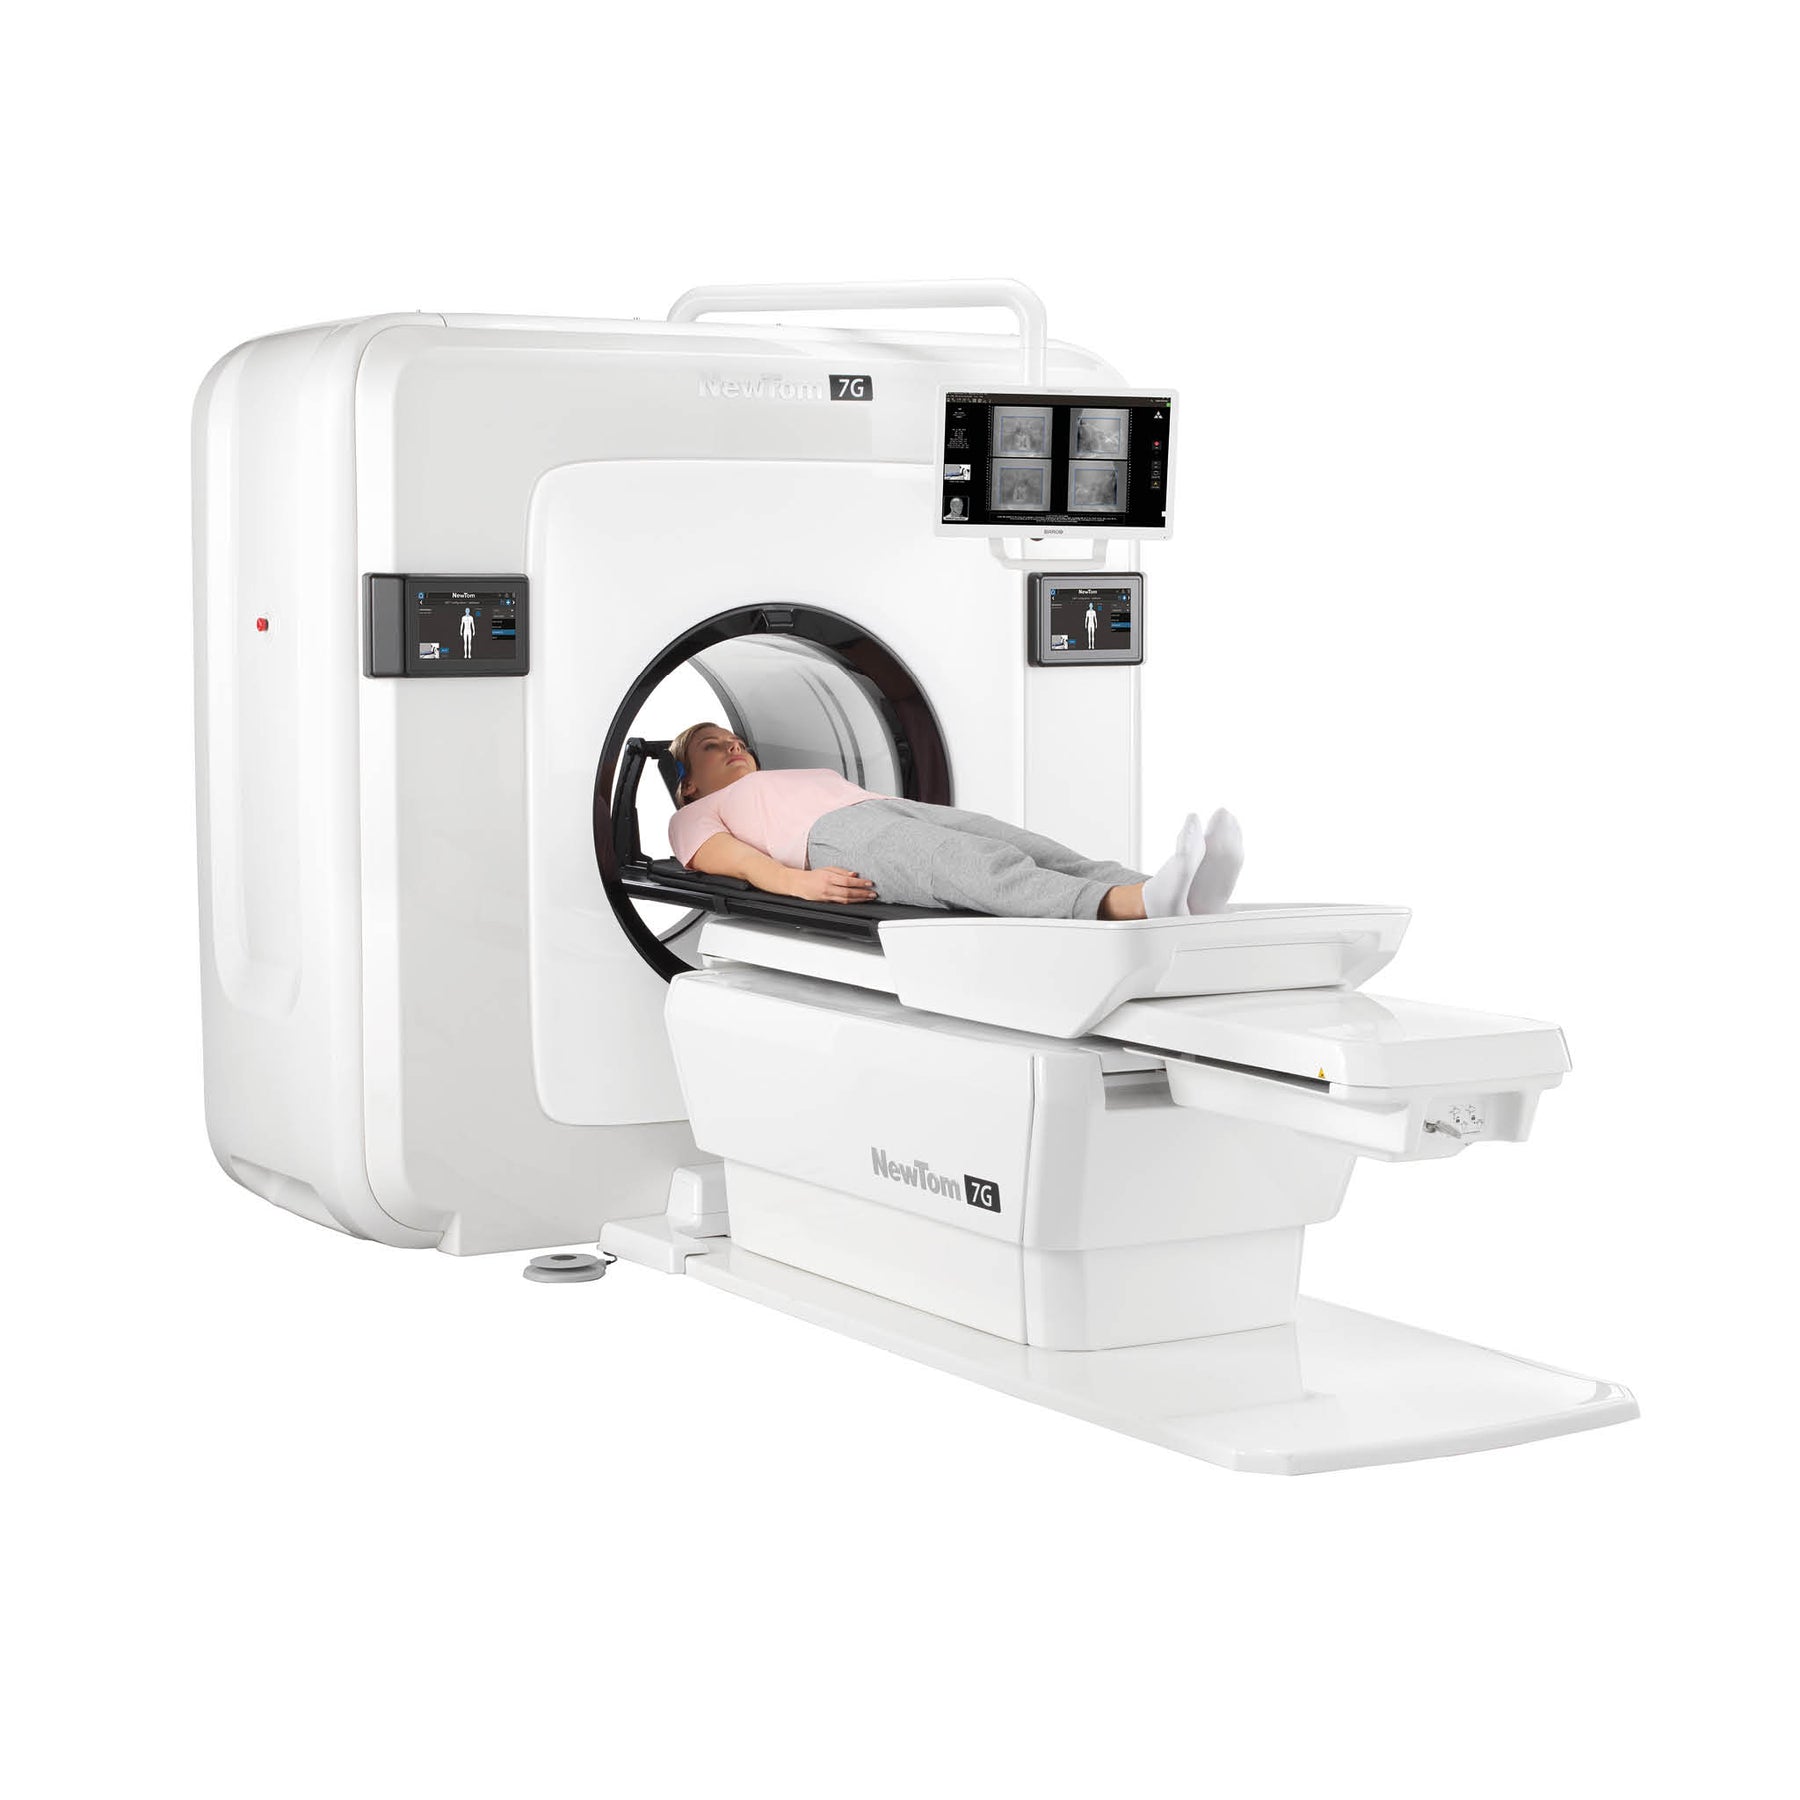 NewTom 7G is the most advanced CBCT device on the market. Optimal lying down position.